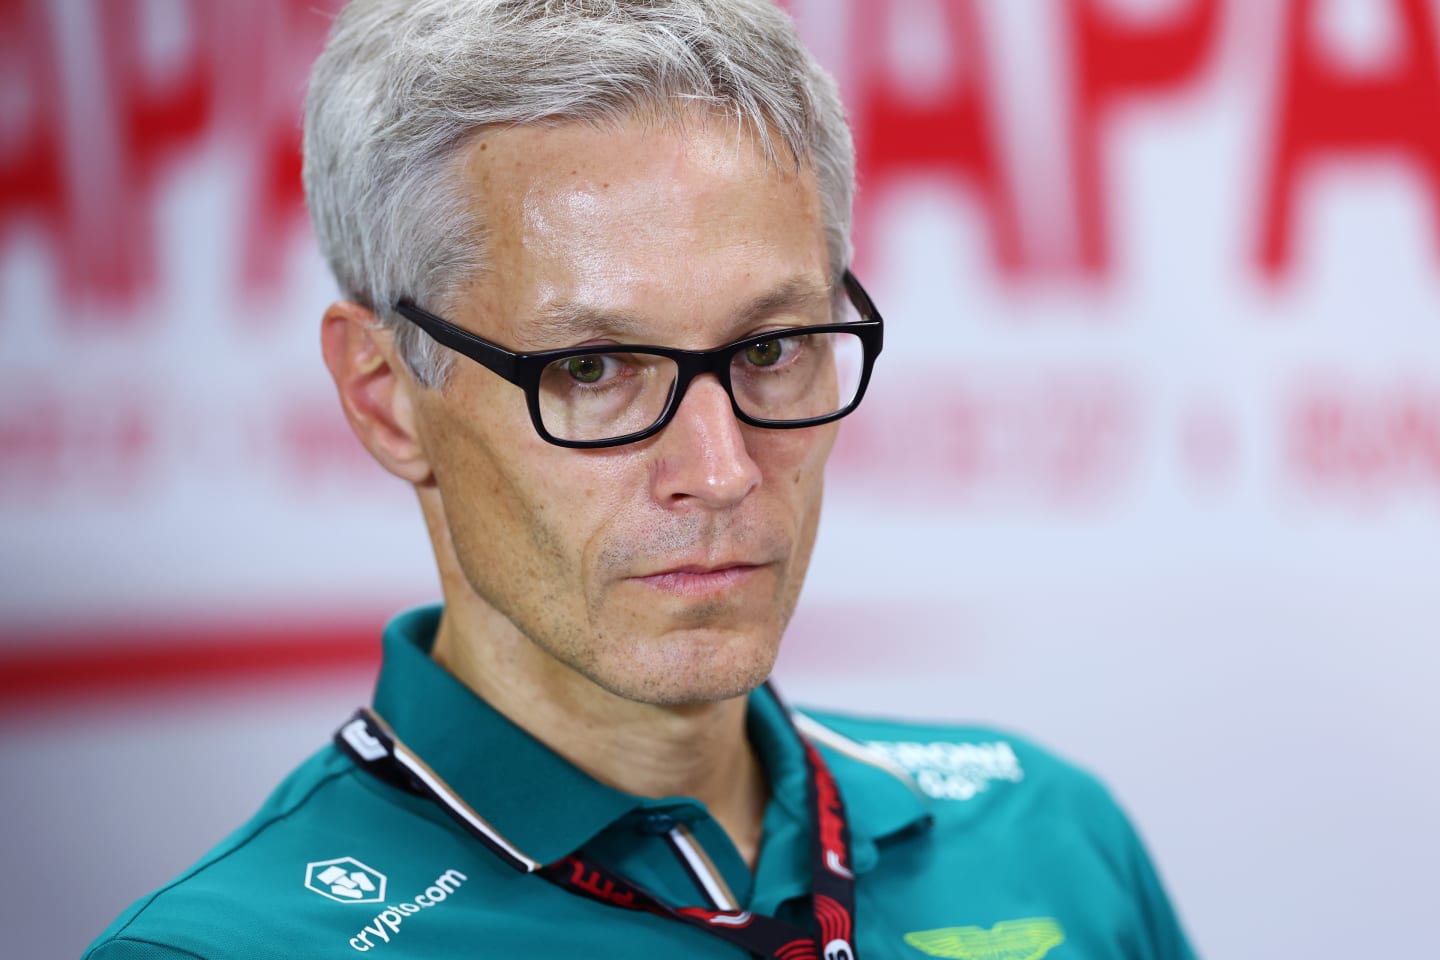 SUZUKA, JAPAN - SEPTEMBER 22: Mike Krack, Team Principal of the Aston Martin F1 Team attends the Team Principals Press Conference during practice ahead of the F1 Grand Prix of Japan at Suzuka International Racing Course on September 22, 2023 in Suzuka, Japan. (Photo by Dan Istitene/Getty Images)